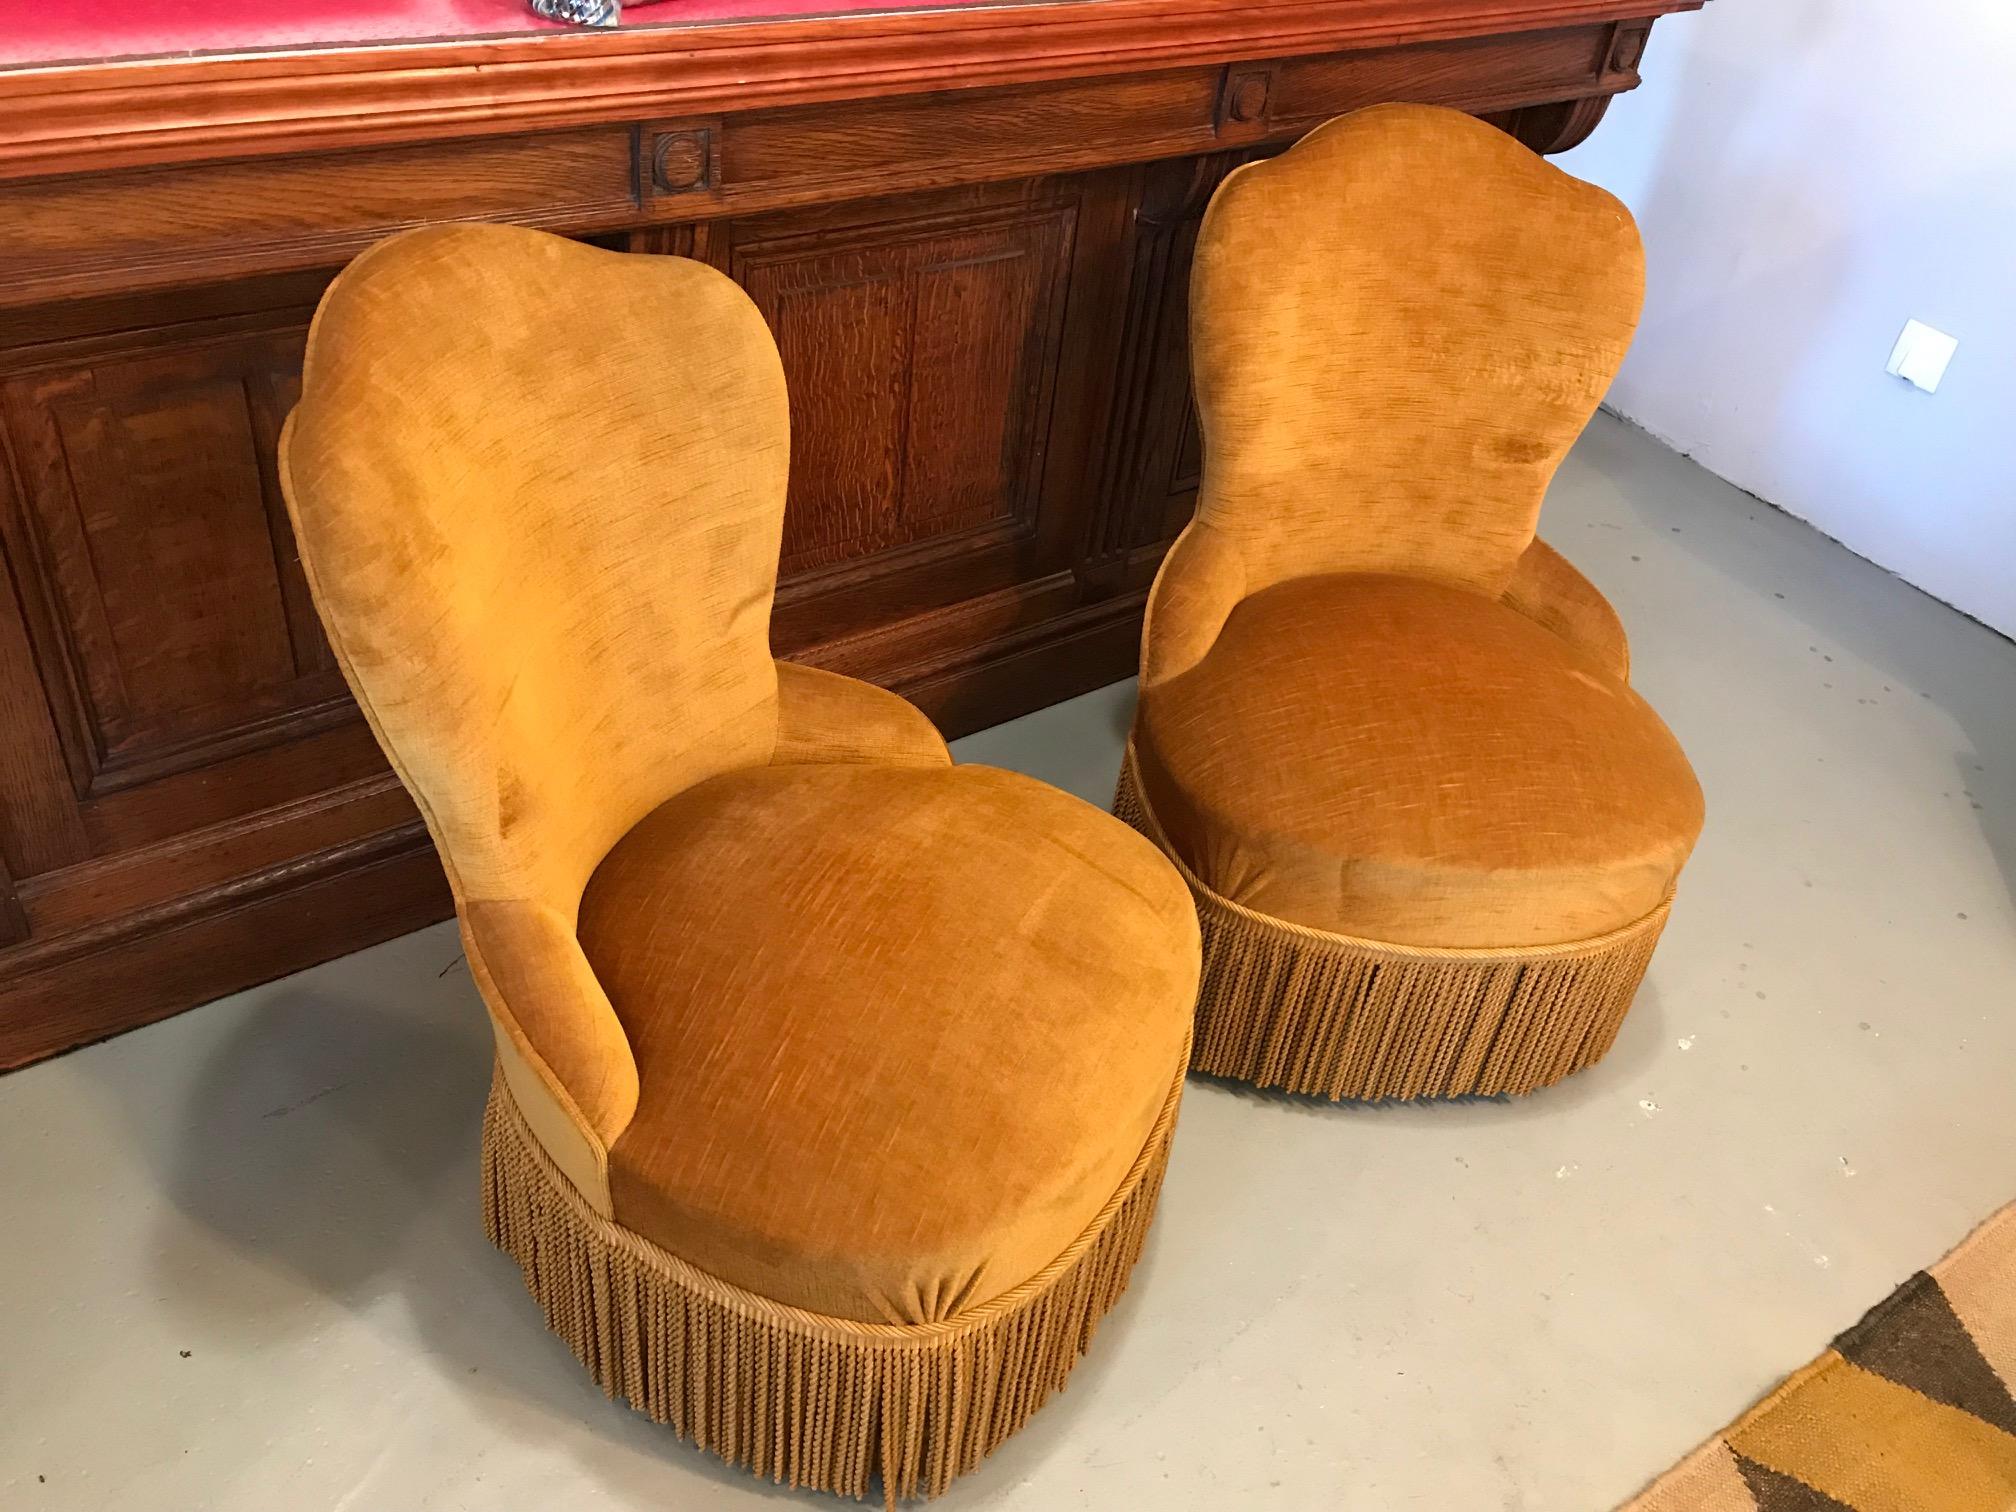 Very nice 20th century French golden Fabric pair of armless chair from the 1950s.
Original fabric. Vintage armchair with fringes. Good quality.